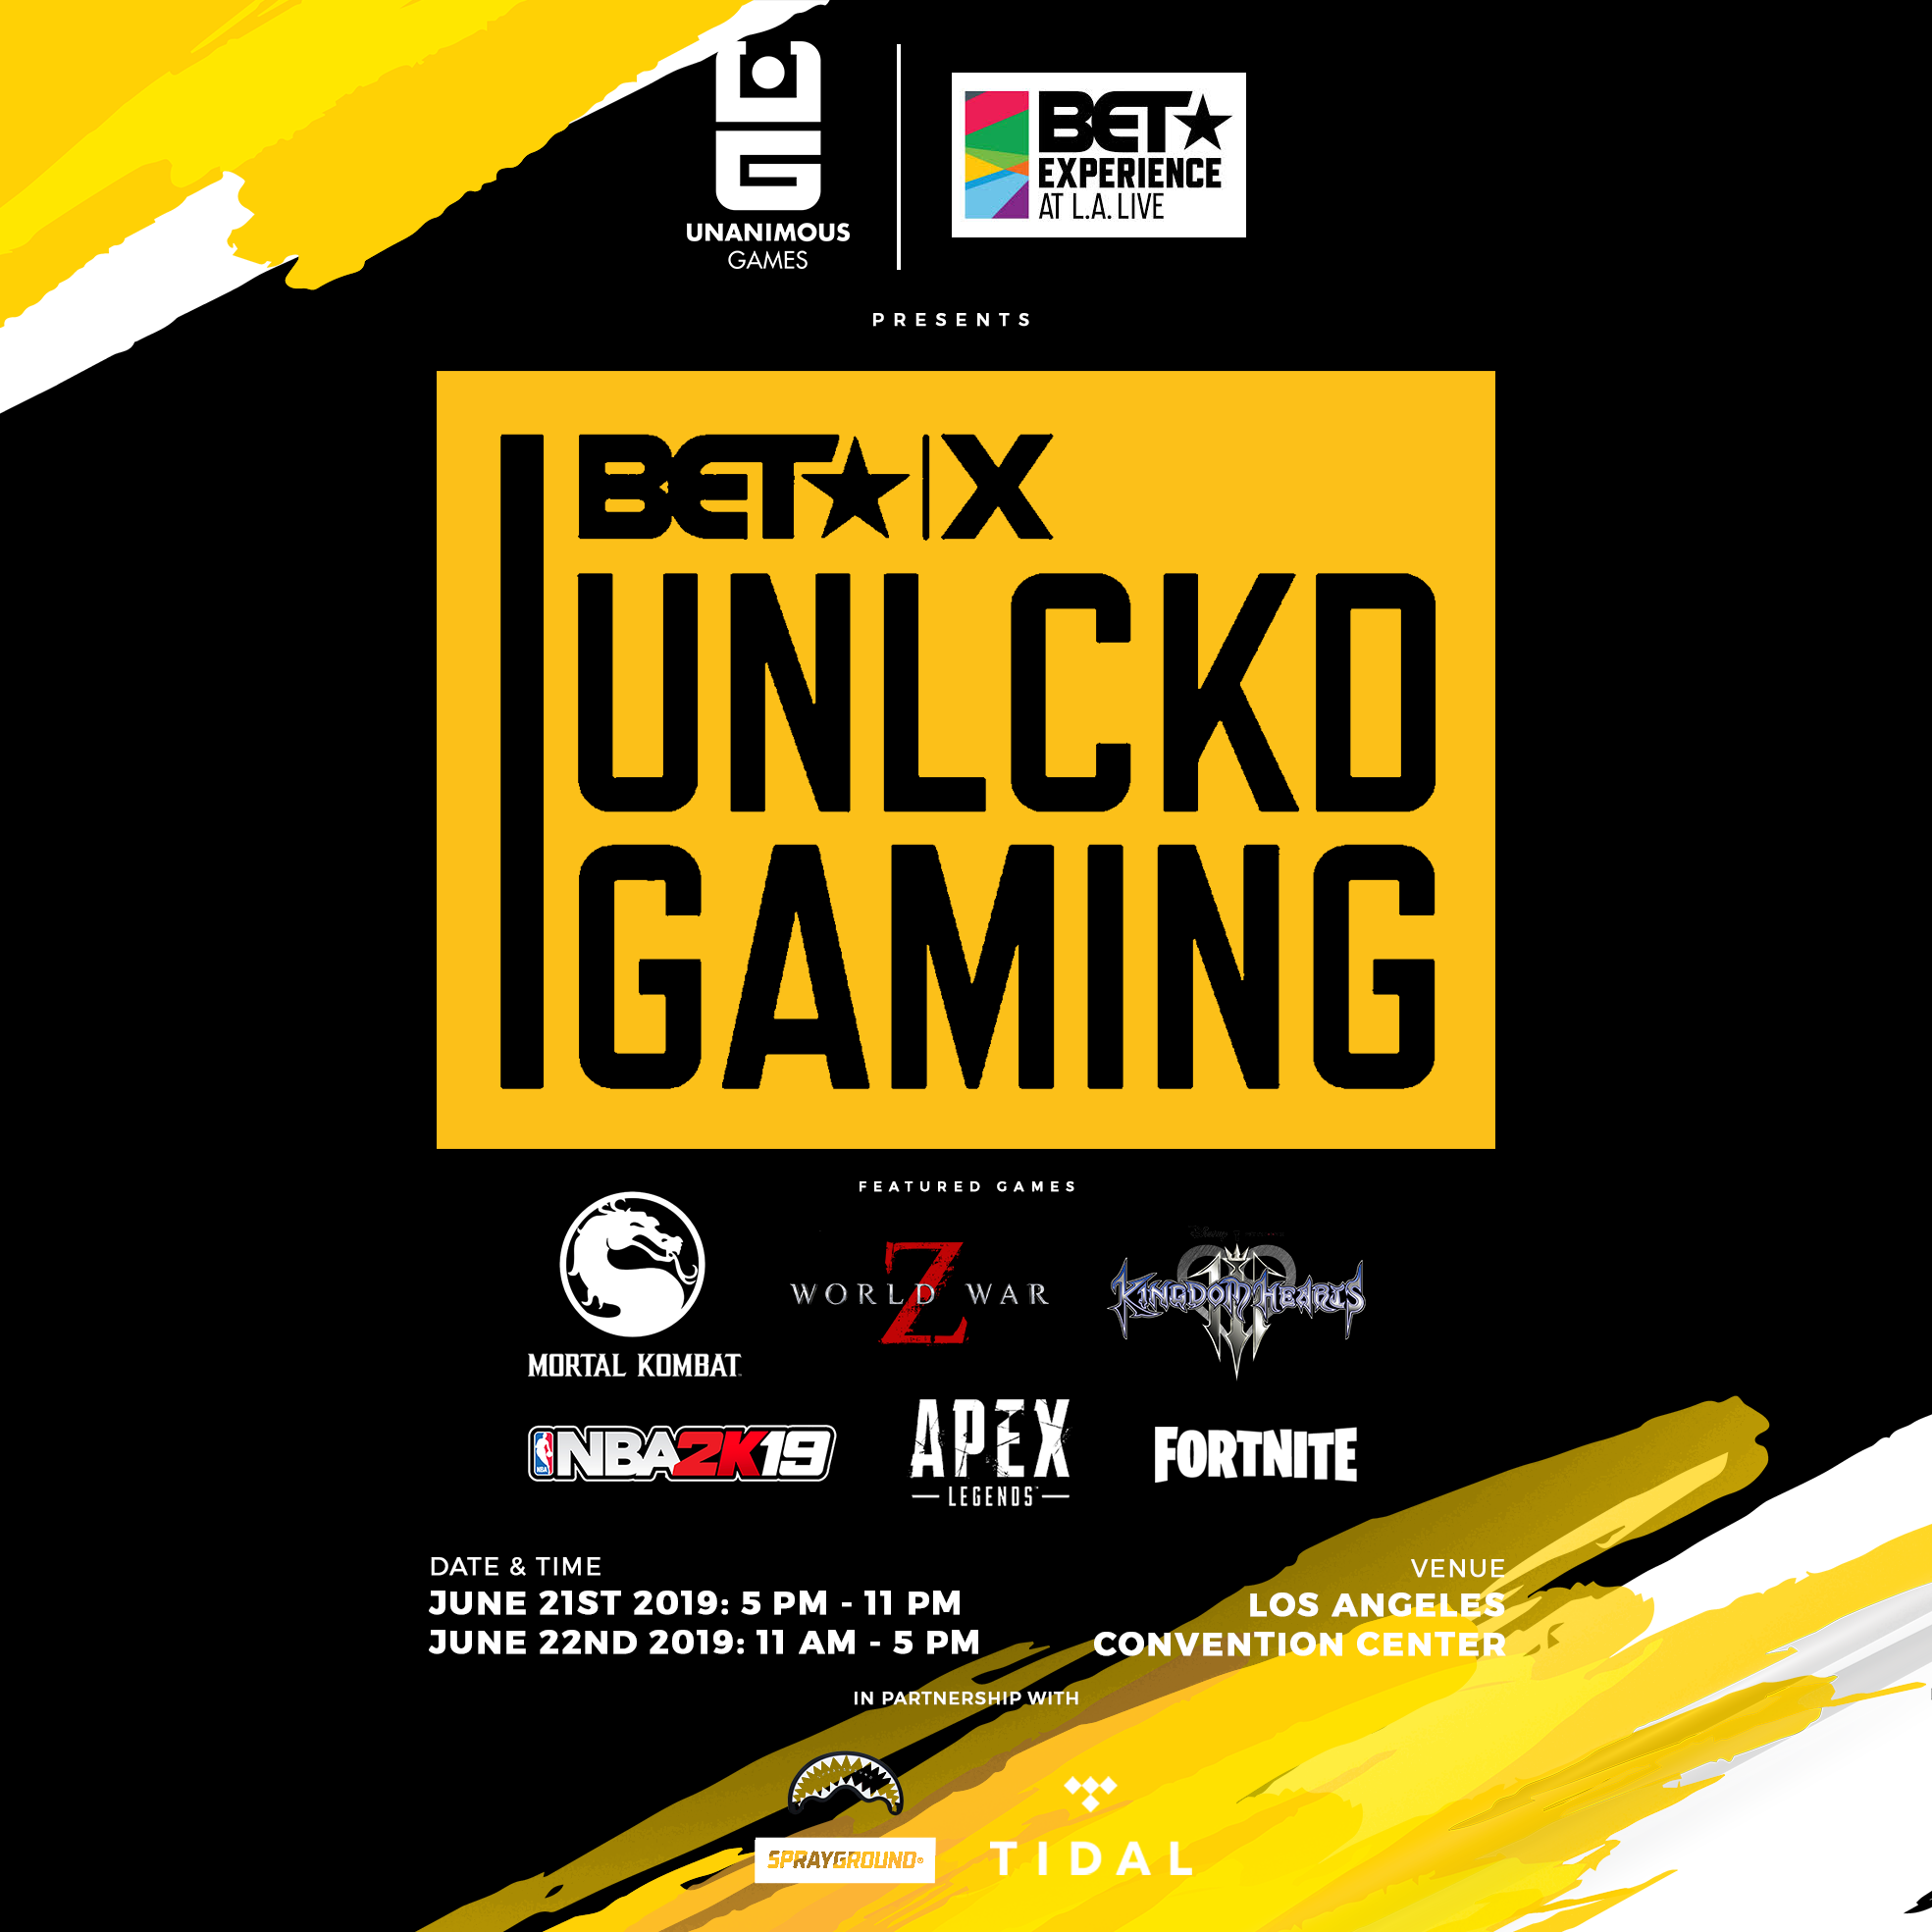 BET x Unanimous games